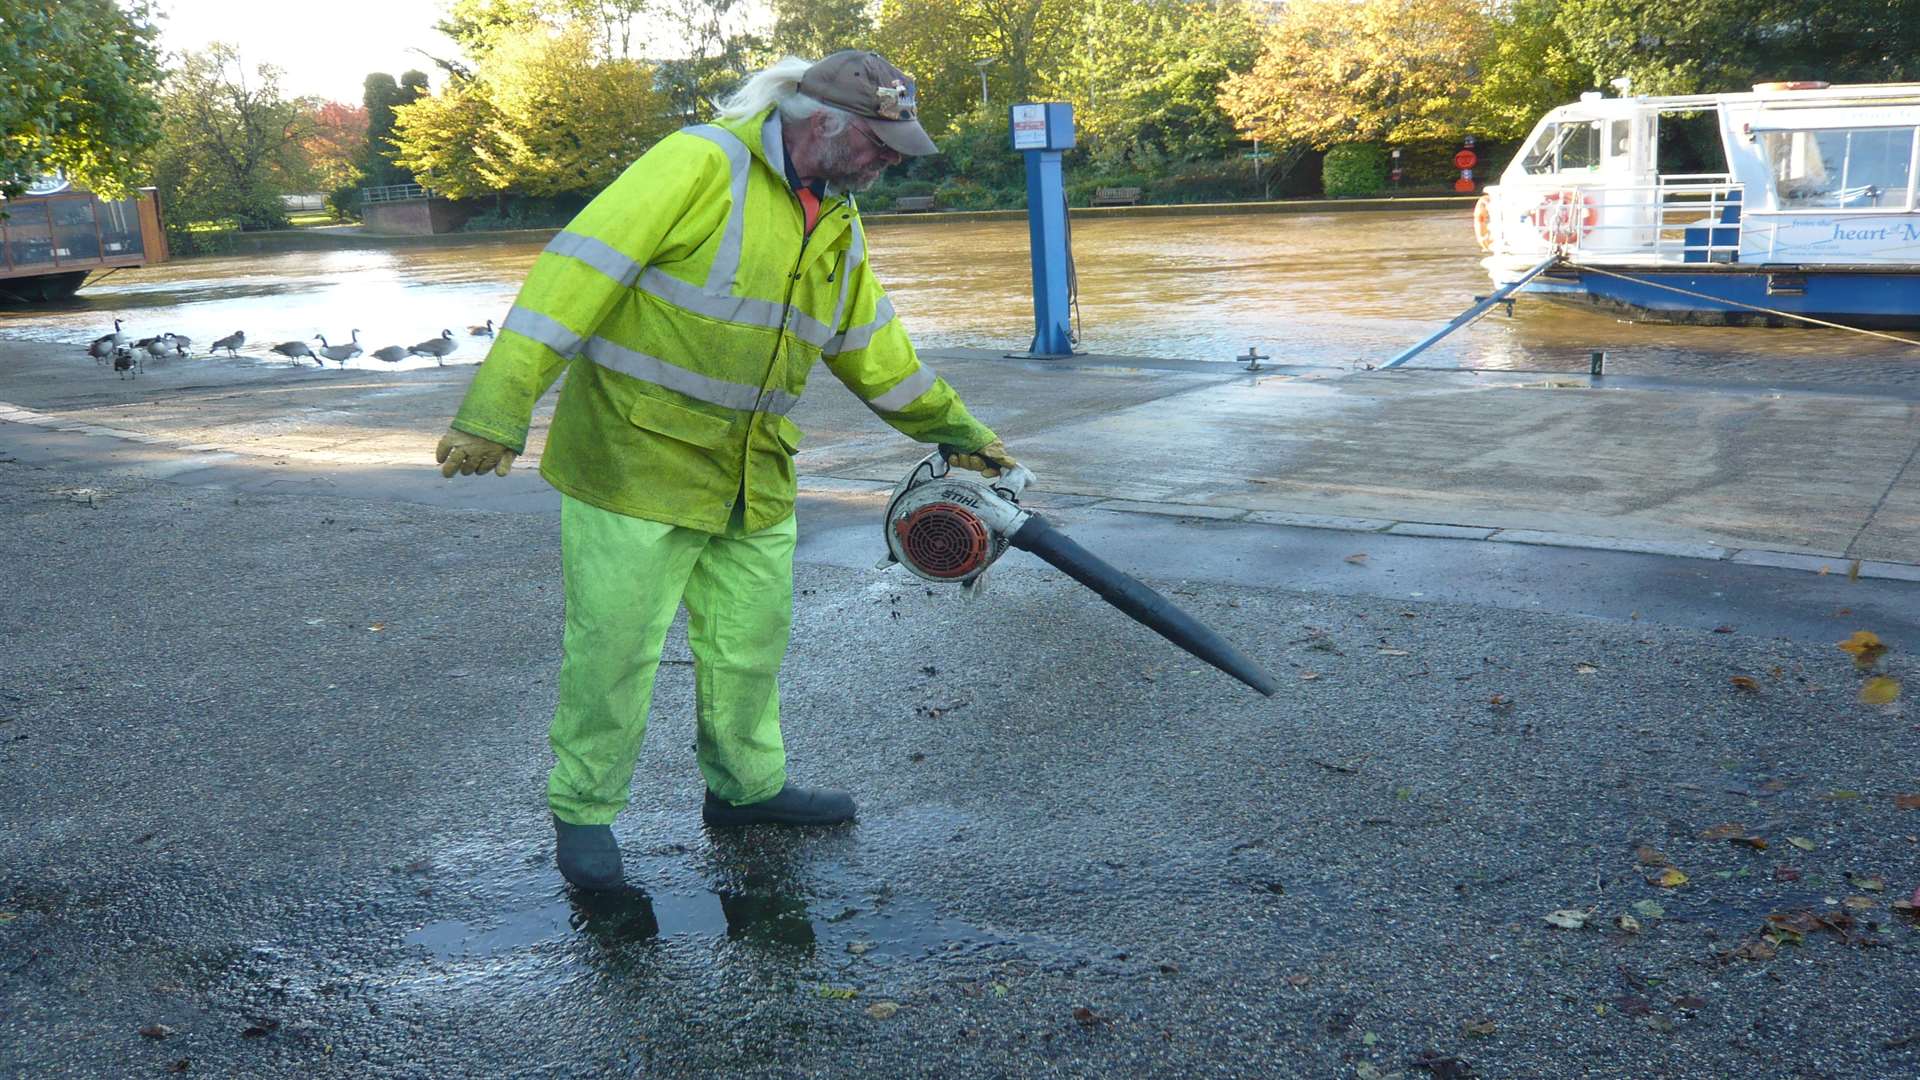 A council worker clearing leaves near the River Medway in Maidstone